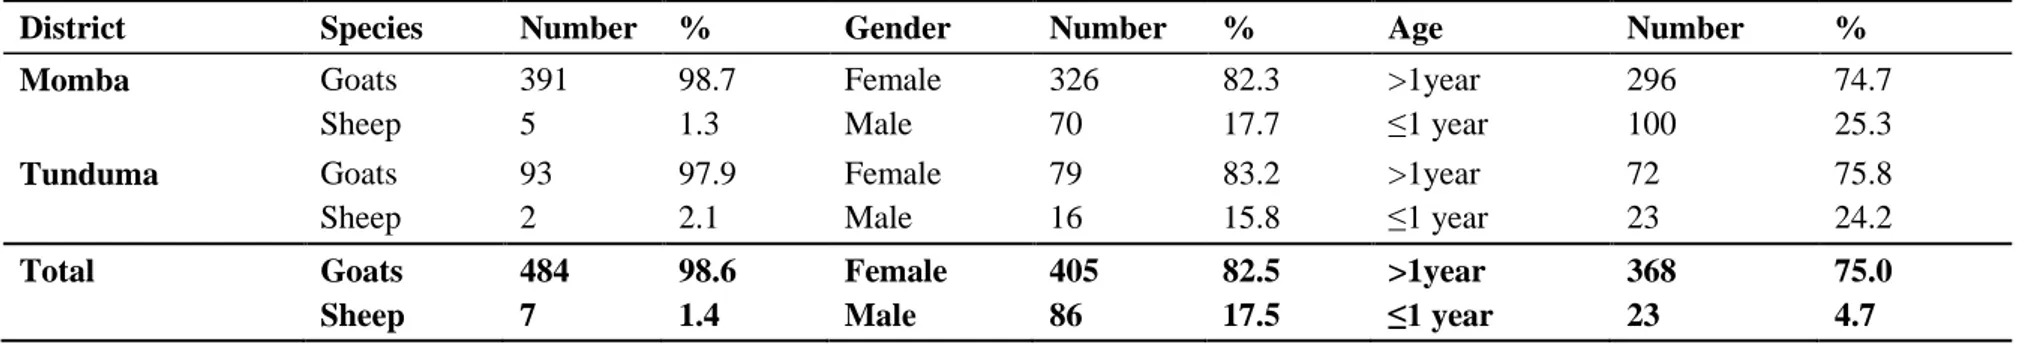 Table 1. Distribution regarding species, gender and age of 491 goats and sheep sampled in Tunduma and Momba districts, Tanzania 